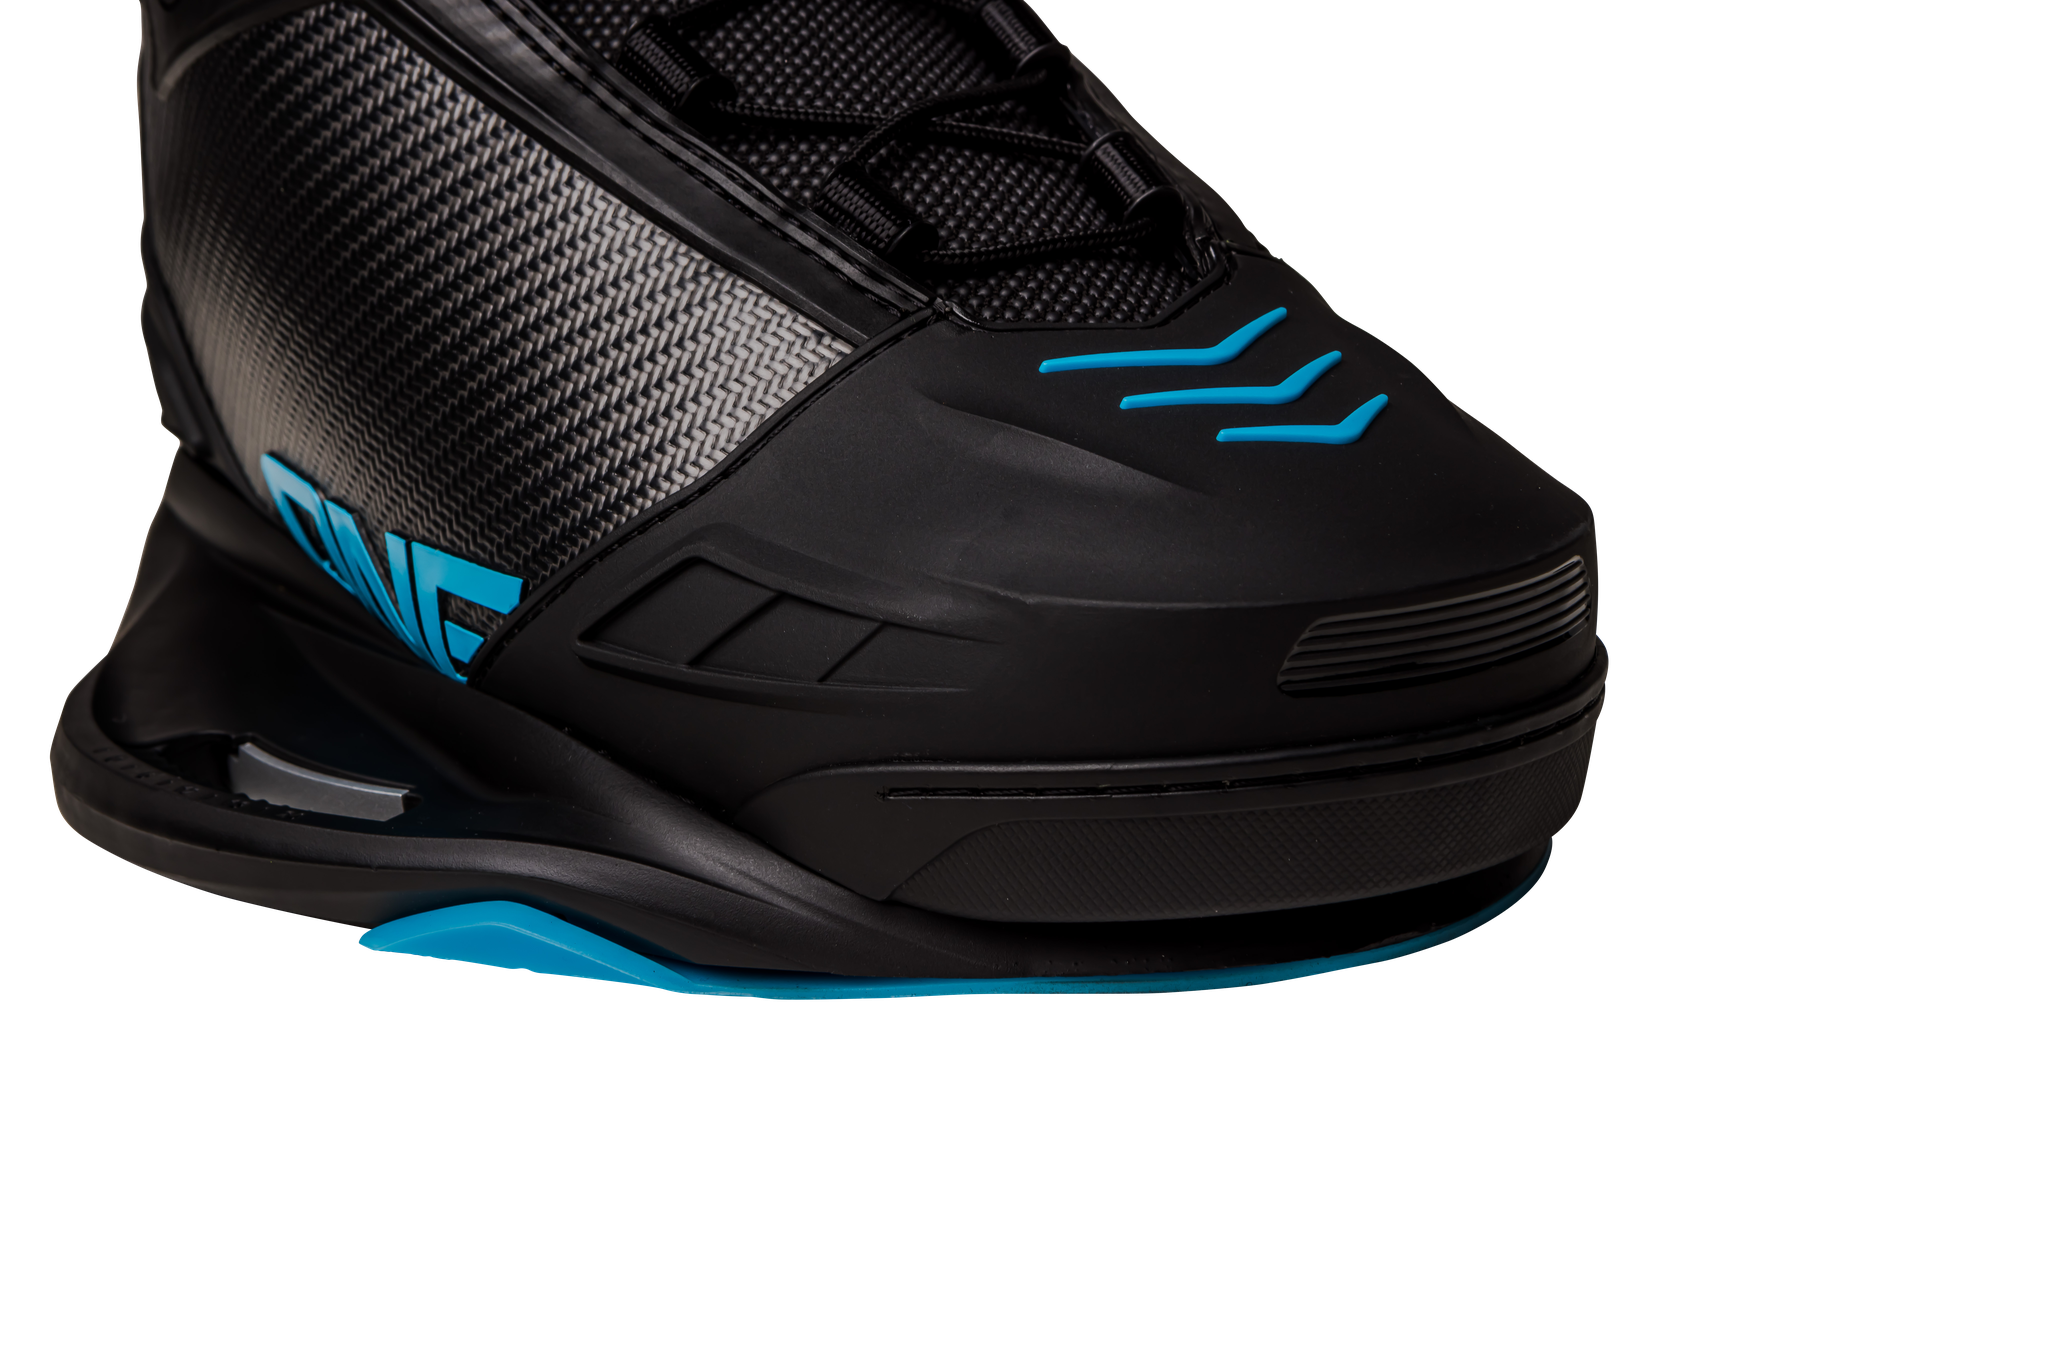 A pair of Ronix 2023 One Carbitex Boots with an Intuition+ heat moldable liner, on a black background.